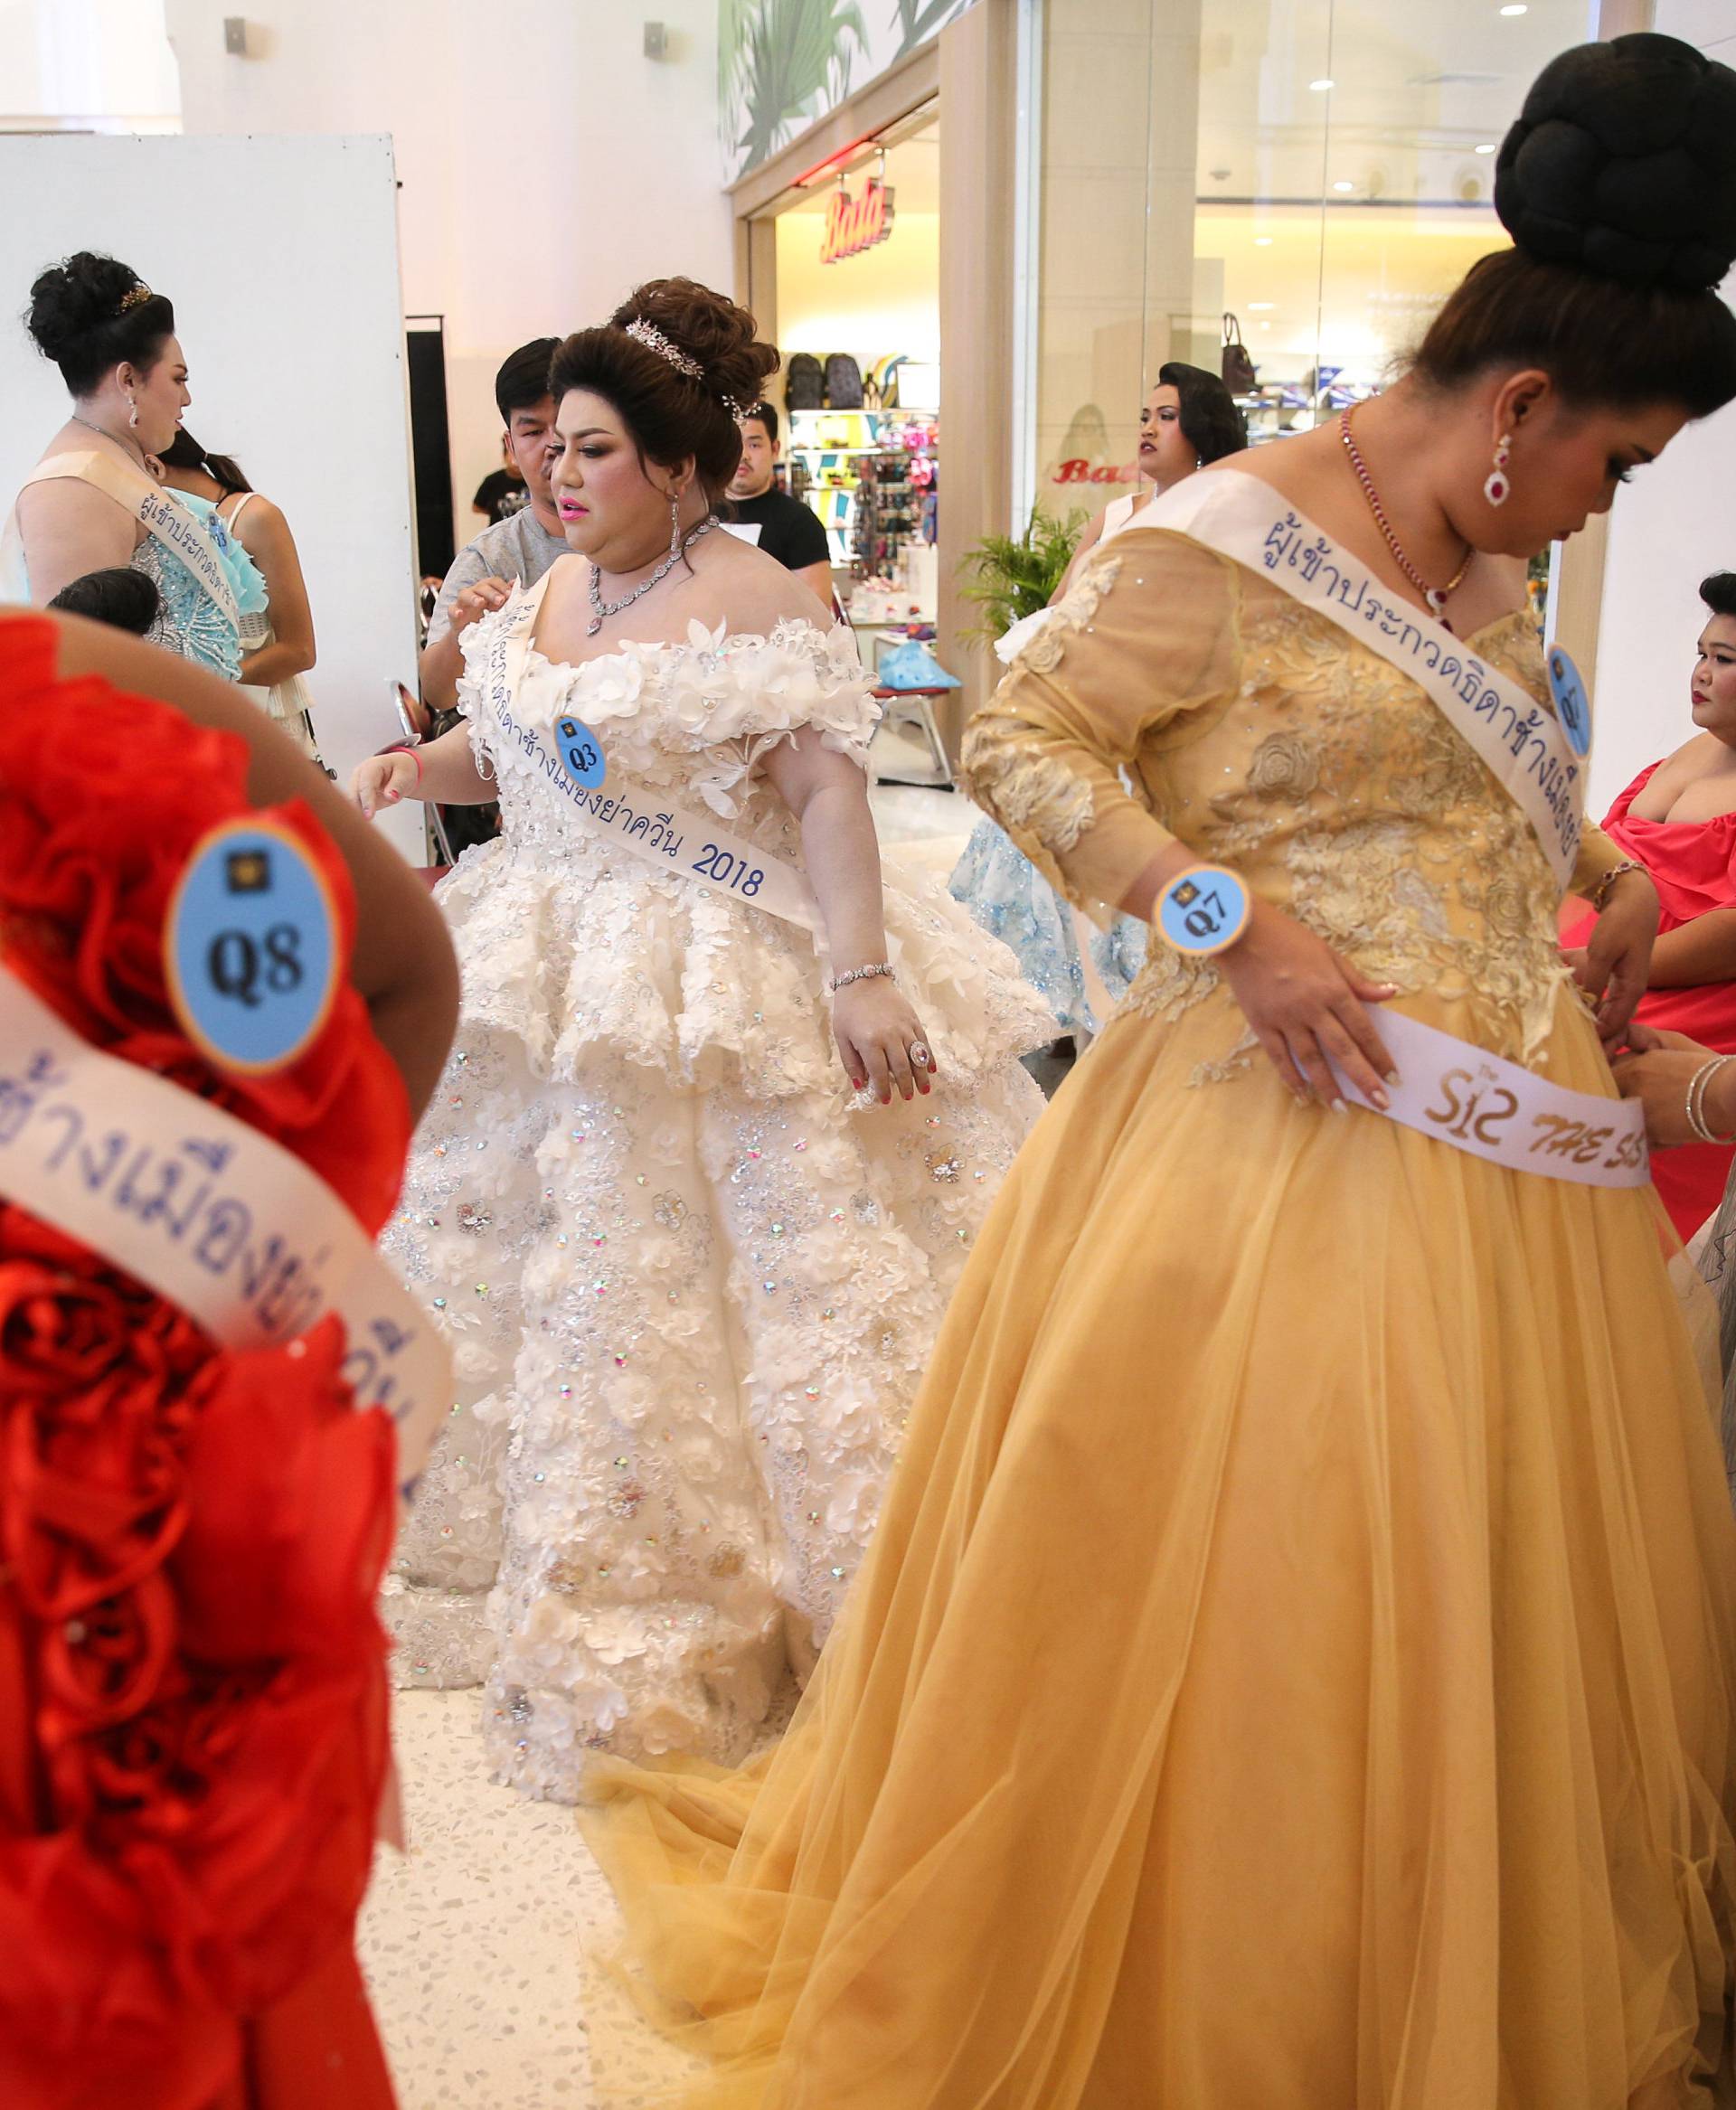 Participants prepare backstage before the final show of the Miss Jumbo 2018 at a department store in Nakhon Ratchasima